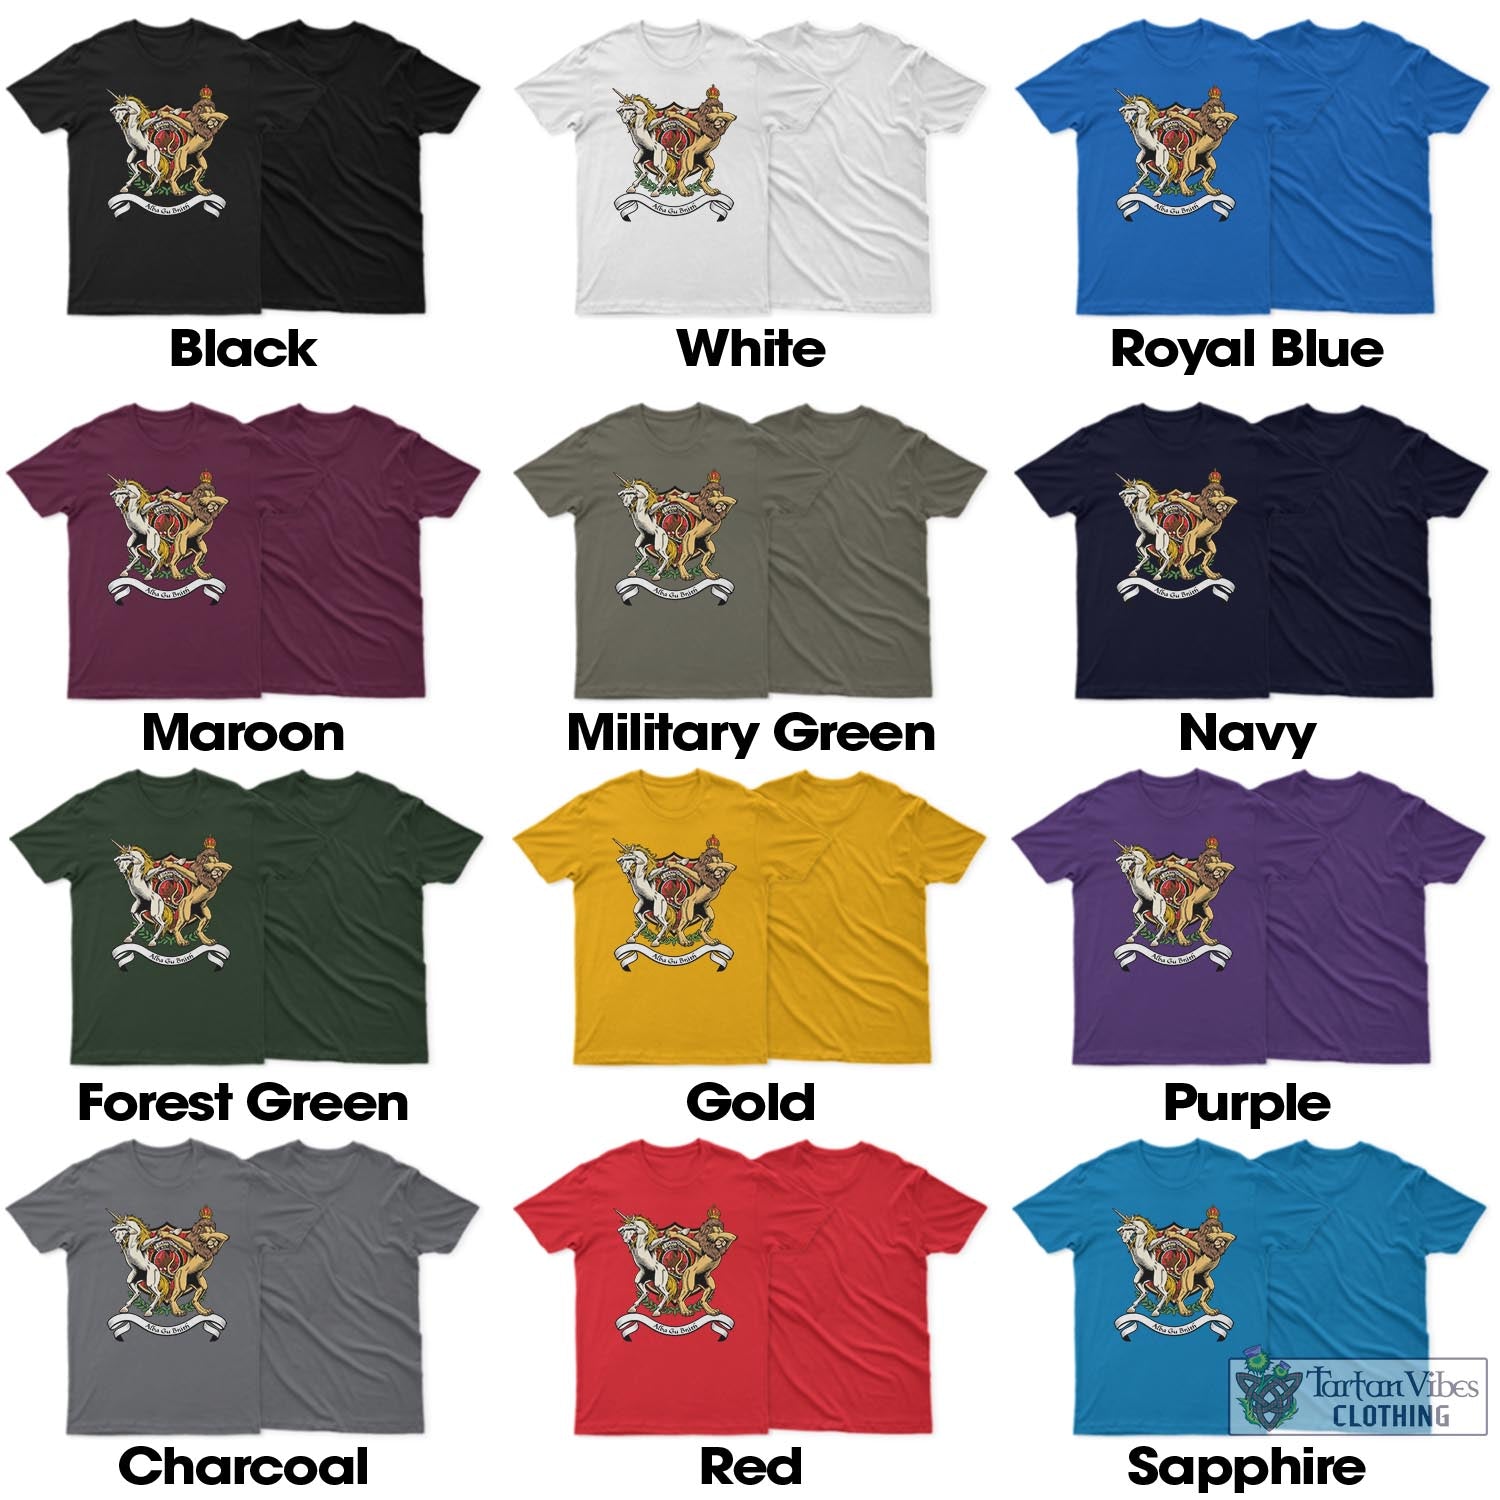 Tartan Vibes Clothing Darroch Family Crest Cotton Men's T-Shirt with Scotland Royal Coat Of Arm Funny Style